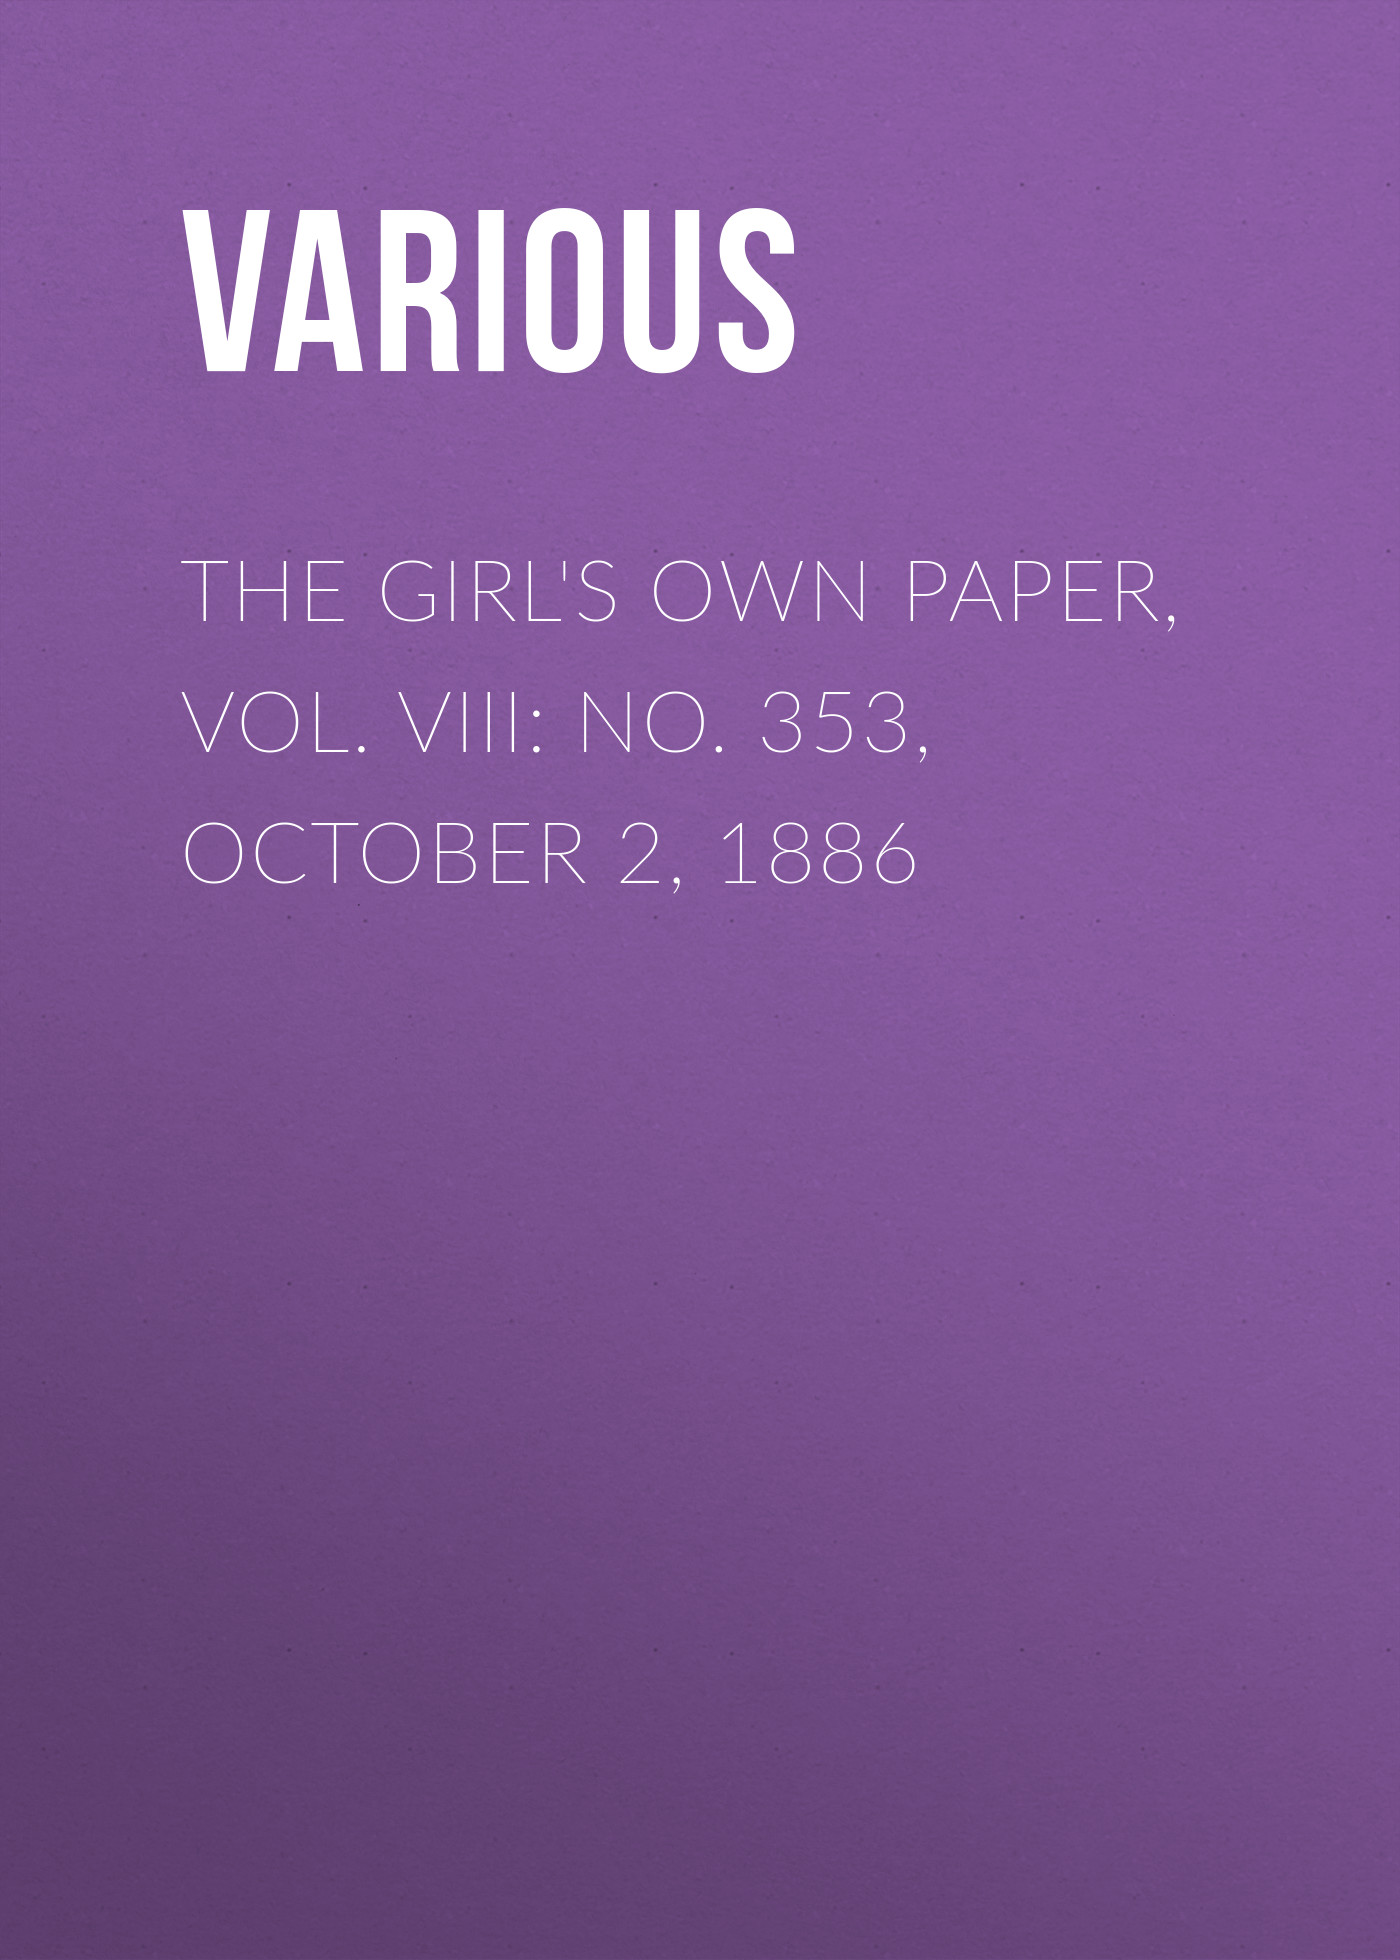 Various The Girl's Own Paper, Vol. VIII: No. 353, October 2, 1886